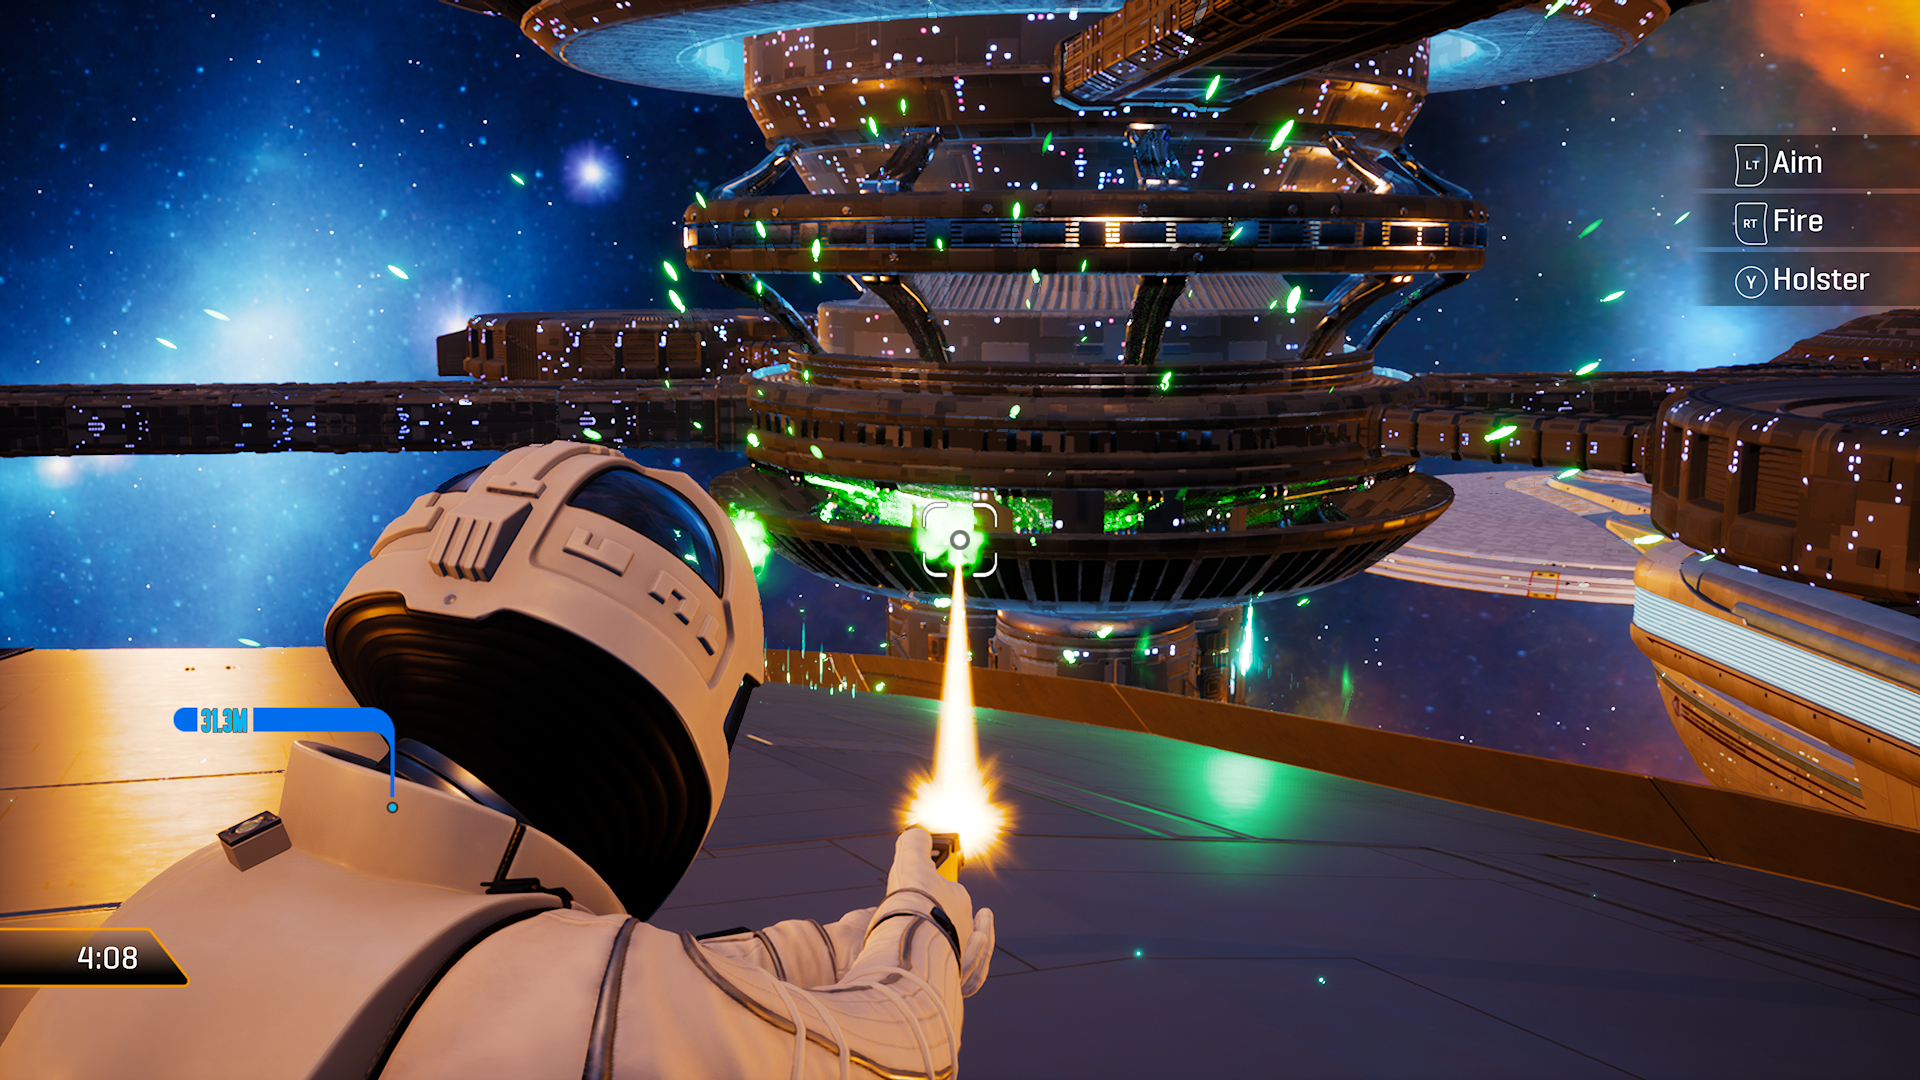 A man in a space suit walks on top of his ship, firing a phaser at a green cloud